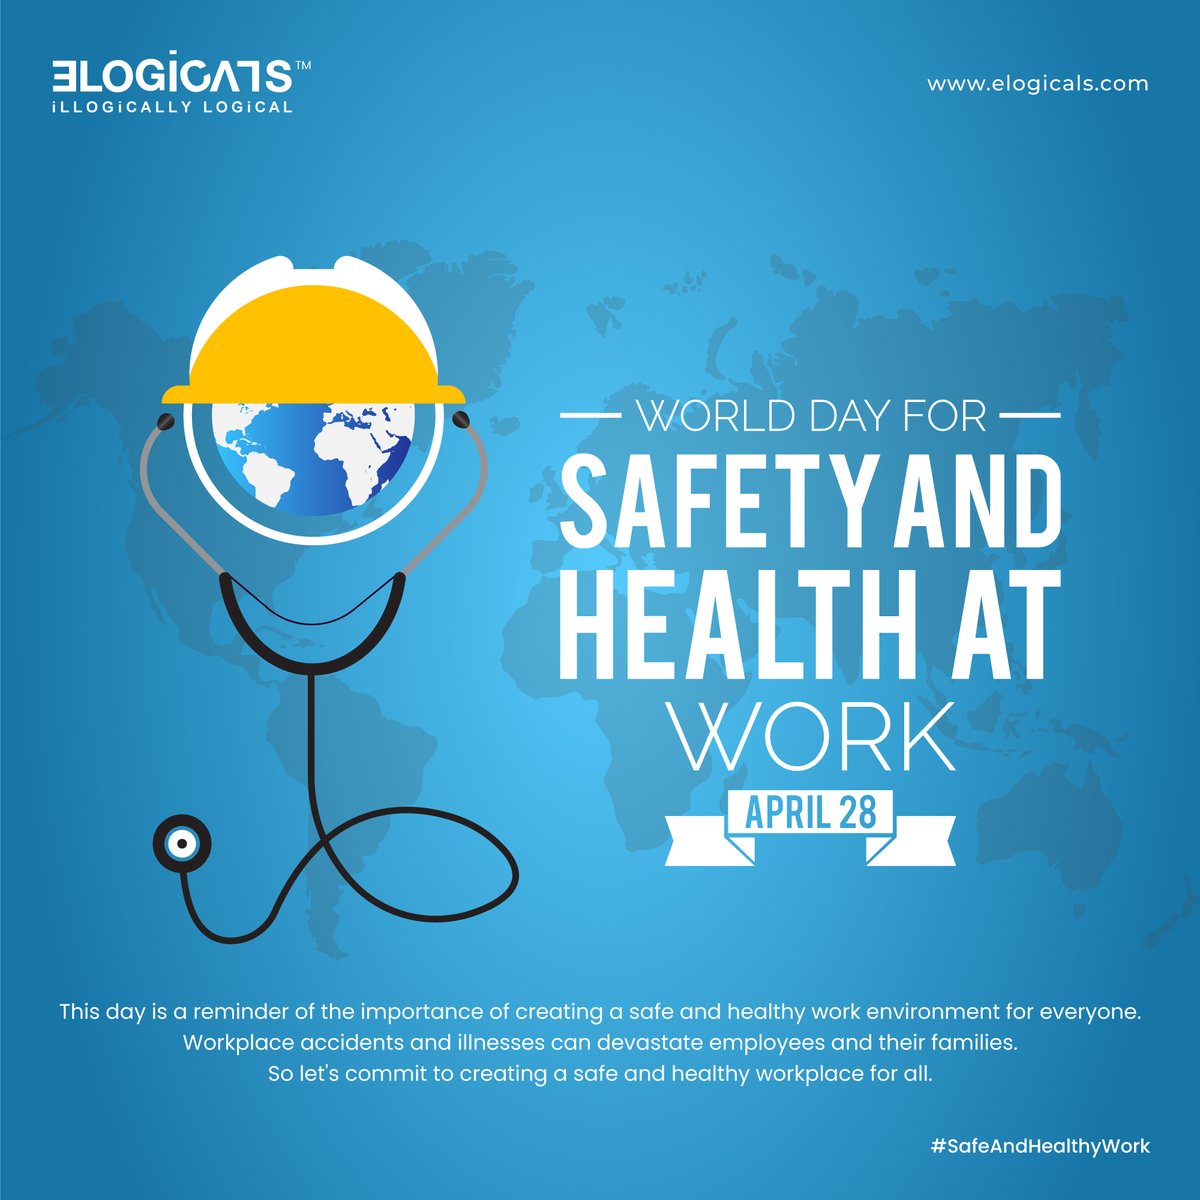 This day is a reminder of the importance of creating a safe and healthy work environment for everyone. Workplace accidents and illnesses can devastate employees and their families. So let's commit to creating a safe and healthy workplace for all.
#SafeAndHealthyWork #Elogicals